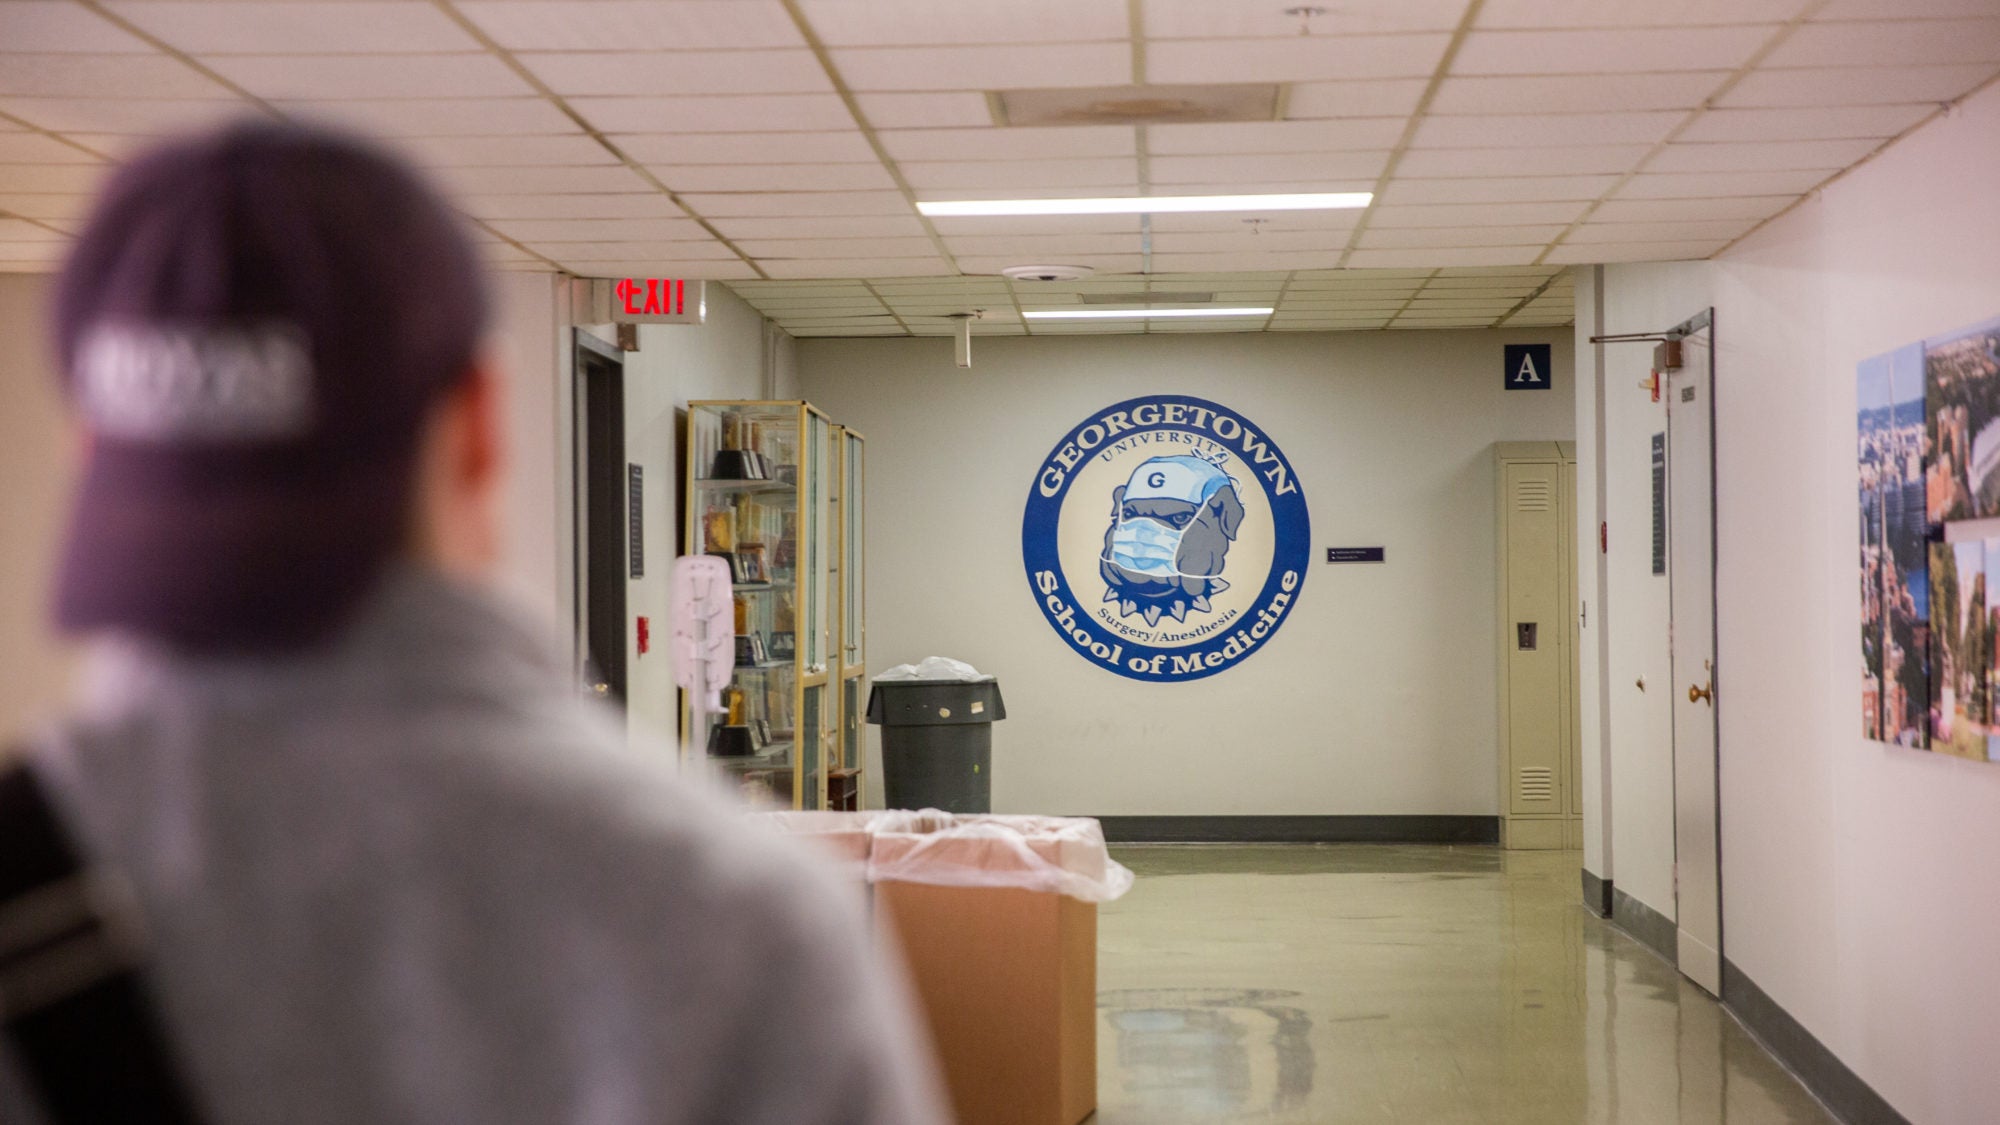 A student with a blue hat on backwards walks down a hallway, at the end of which a logo for the School of Medicine is painted on the wall.